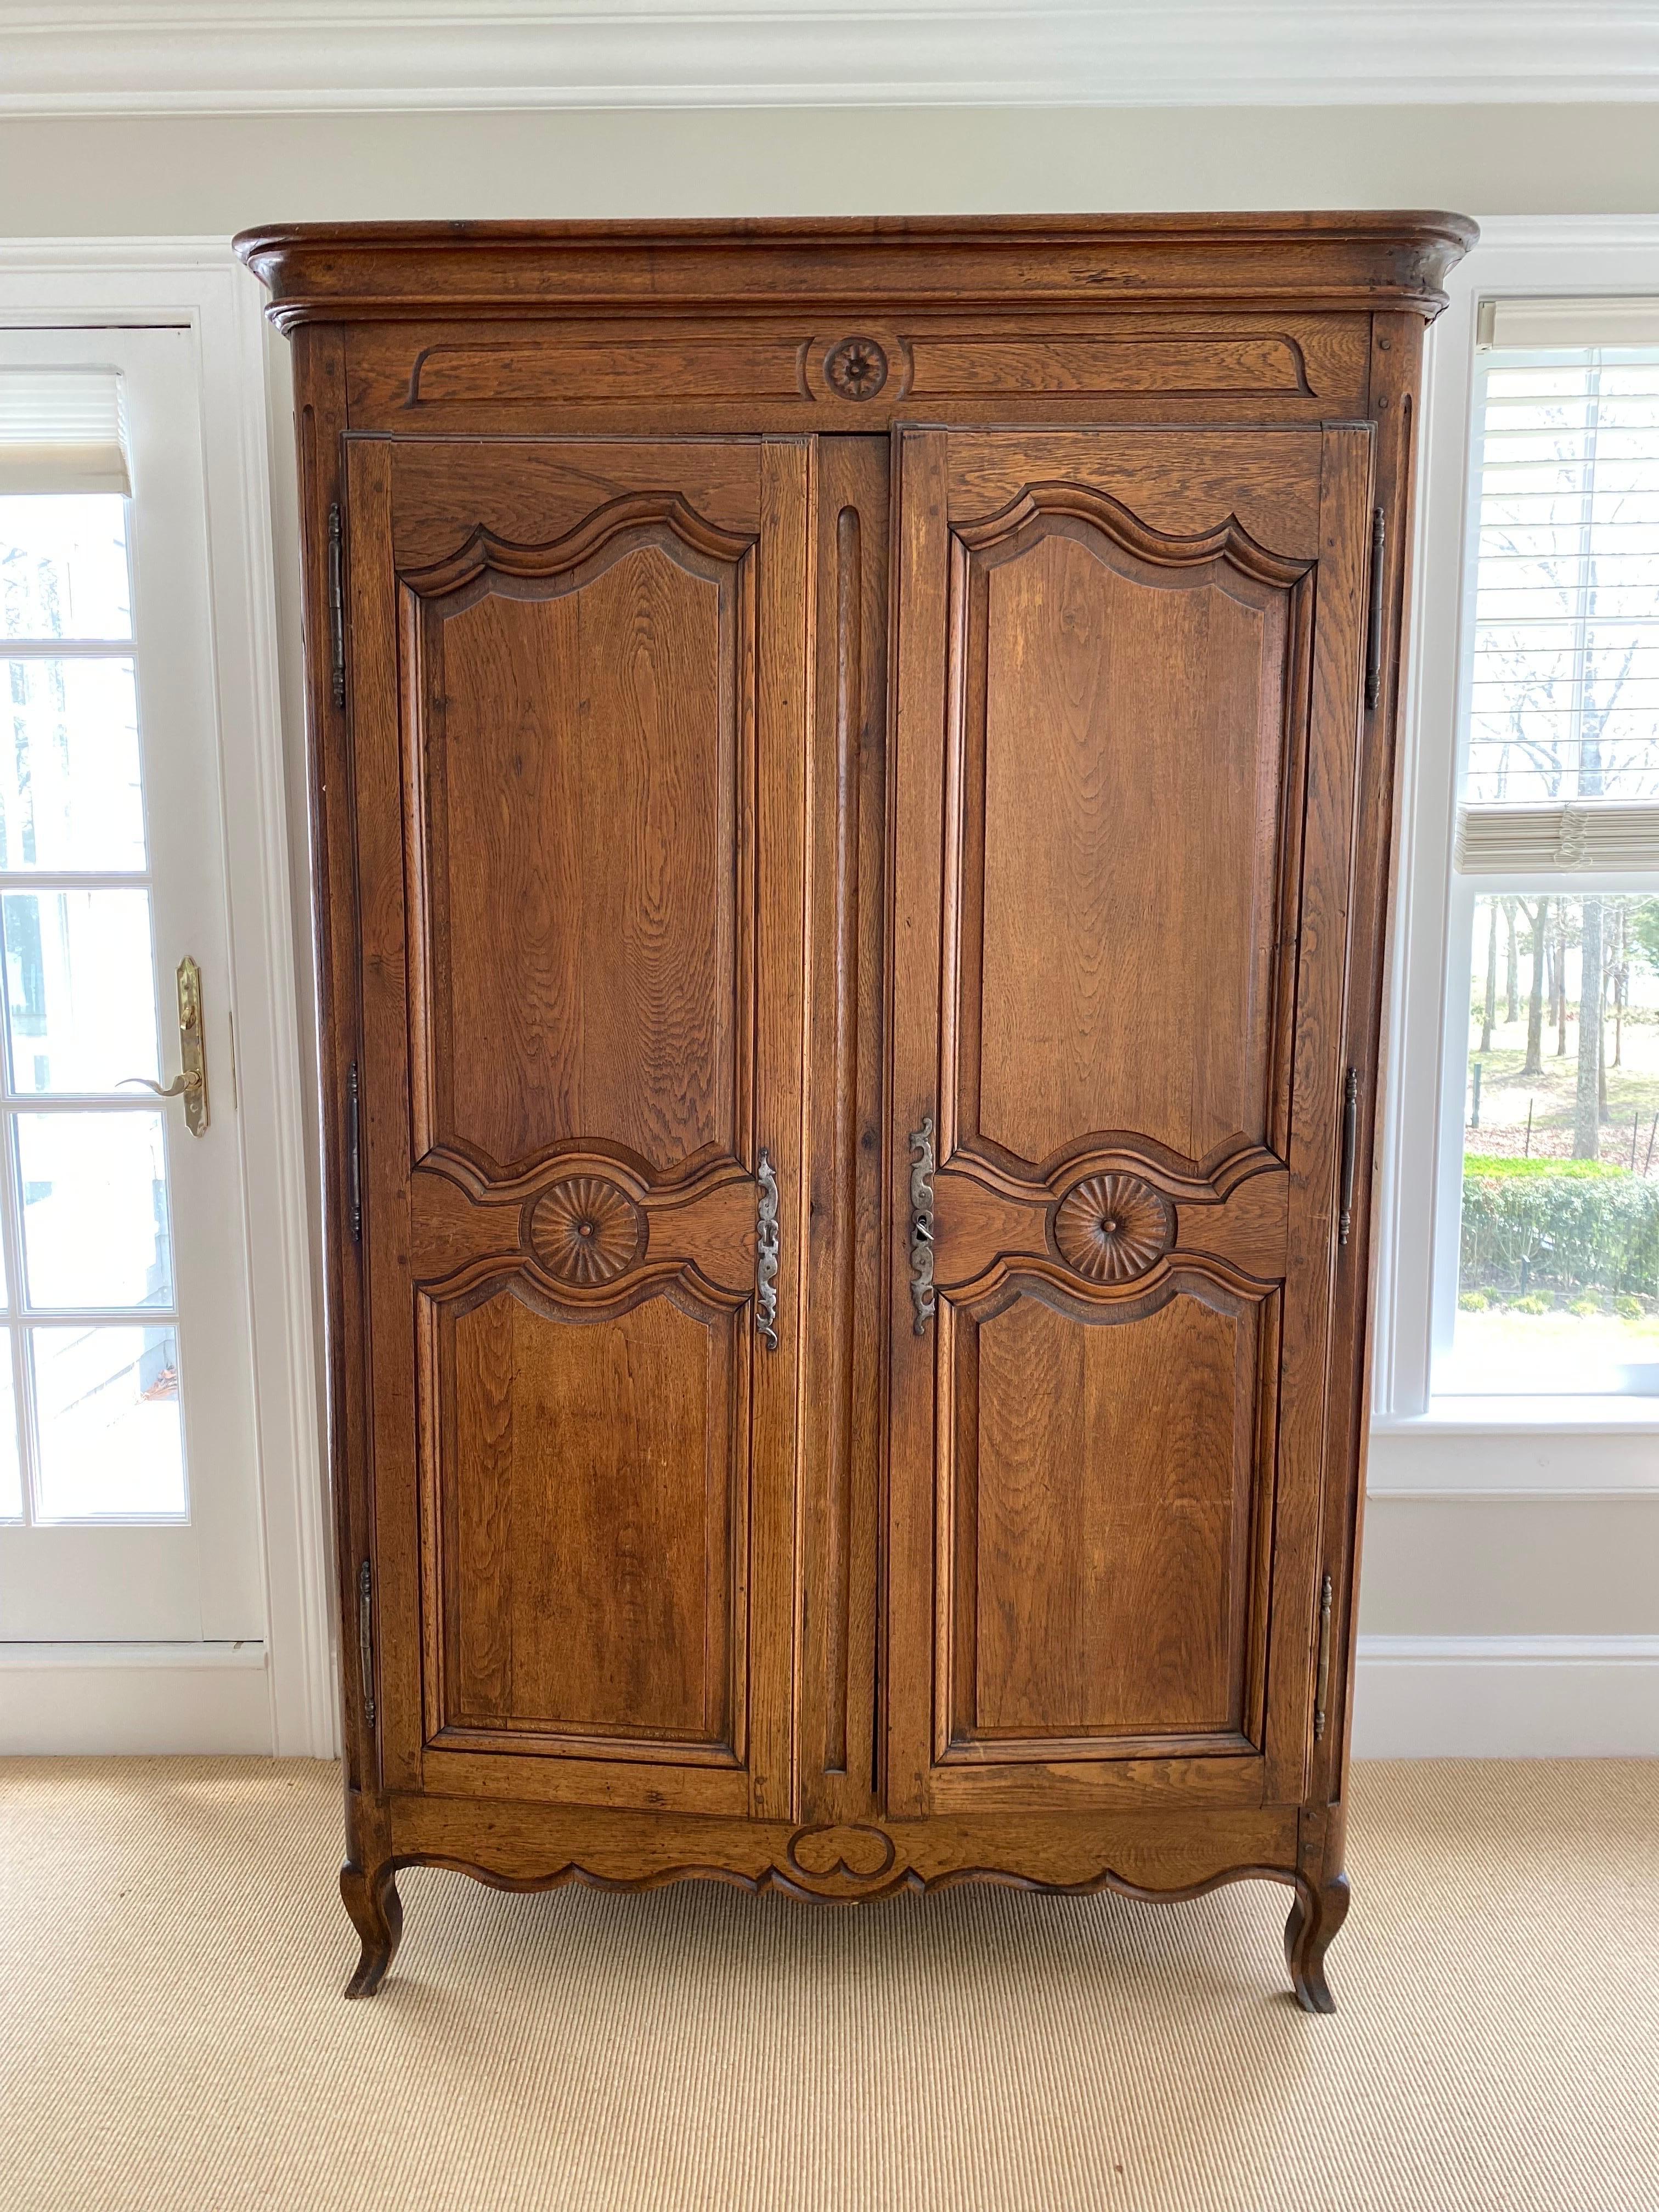 19th C. French provincial oak armoire.
A charmingly carved armoire in oak with central round medallions on the center crown and doors. A later carved heart on the center bottom adds a nice touch, sitting on cabriole legs. Two doors open to two